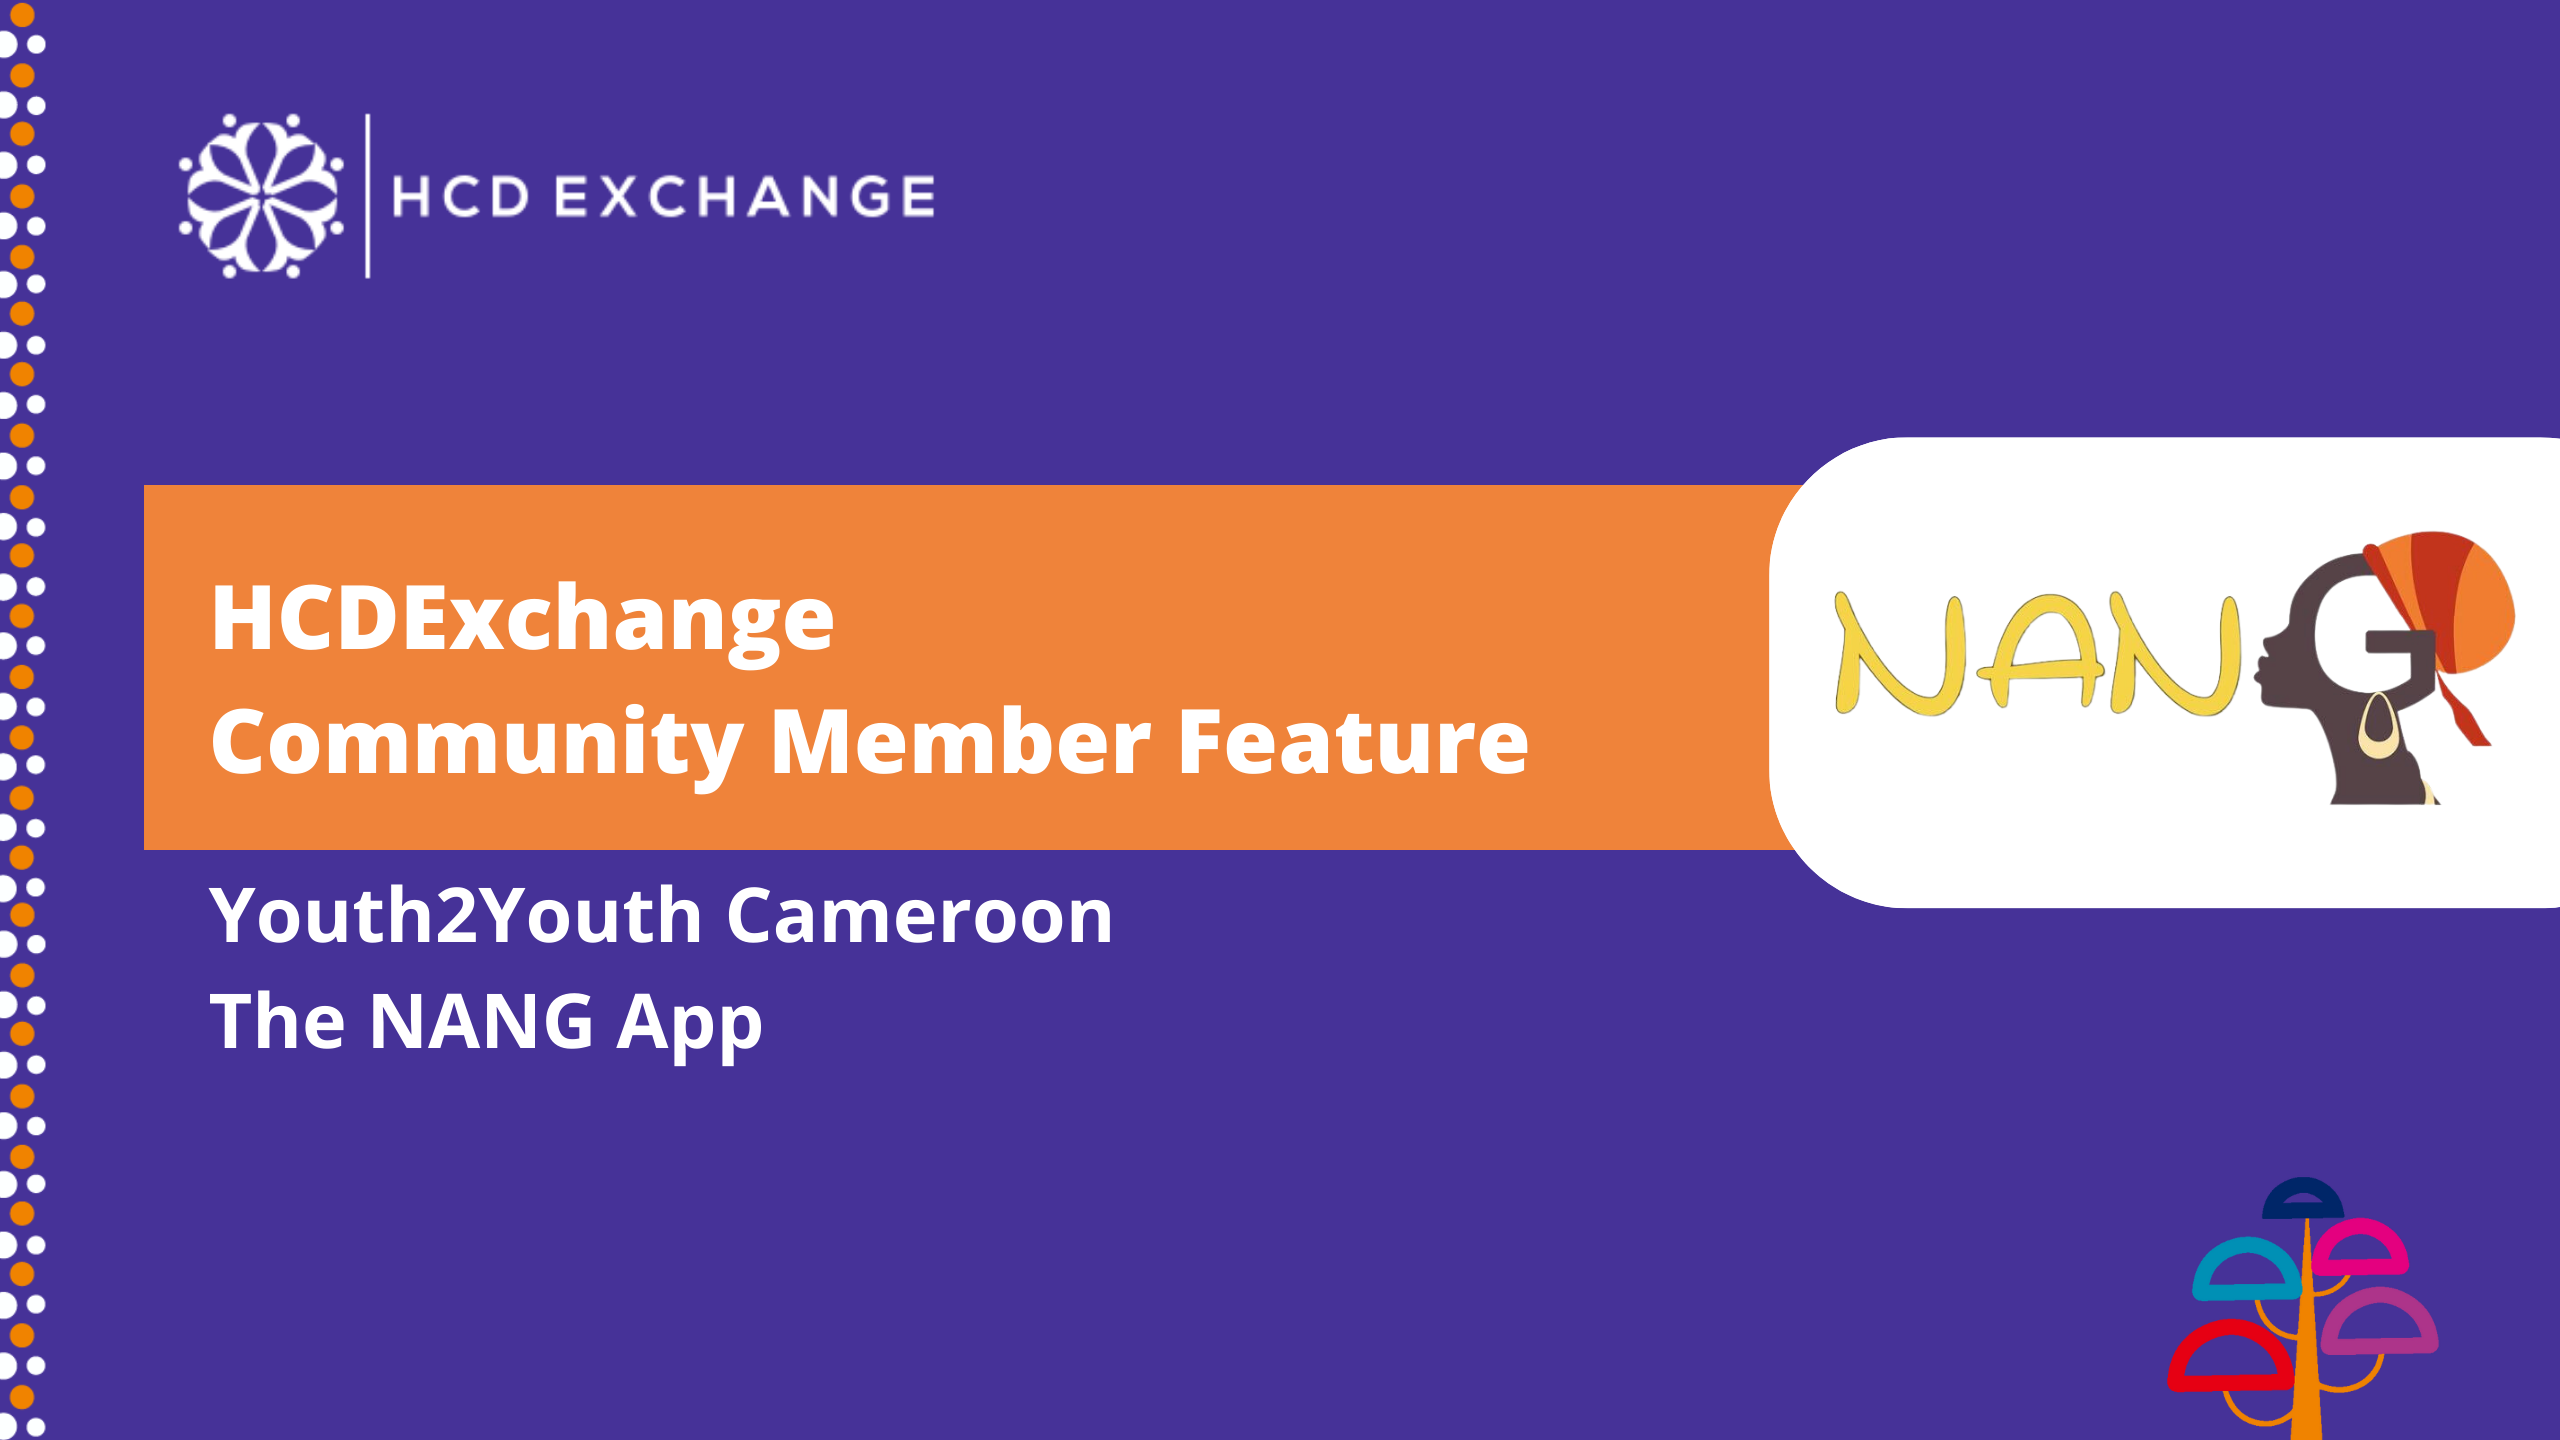 Youth2Youth Cameroon - The NANG App